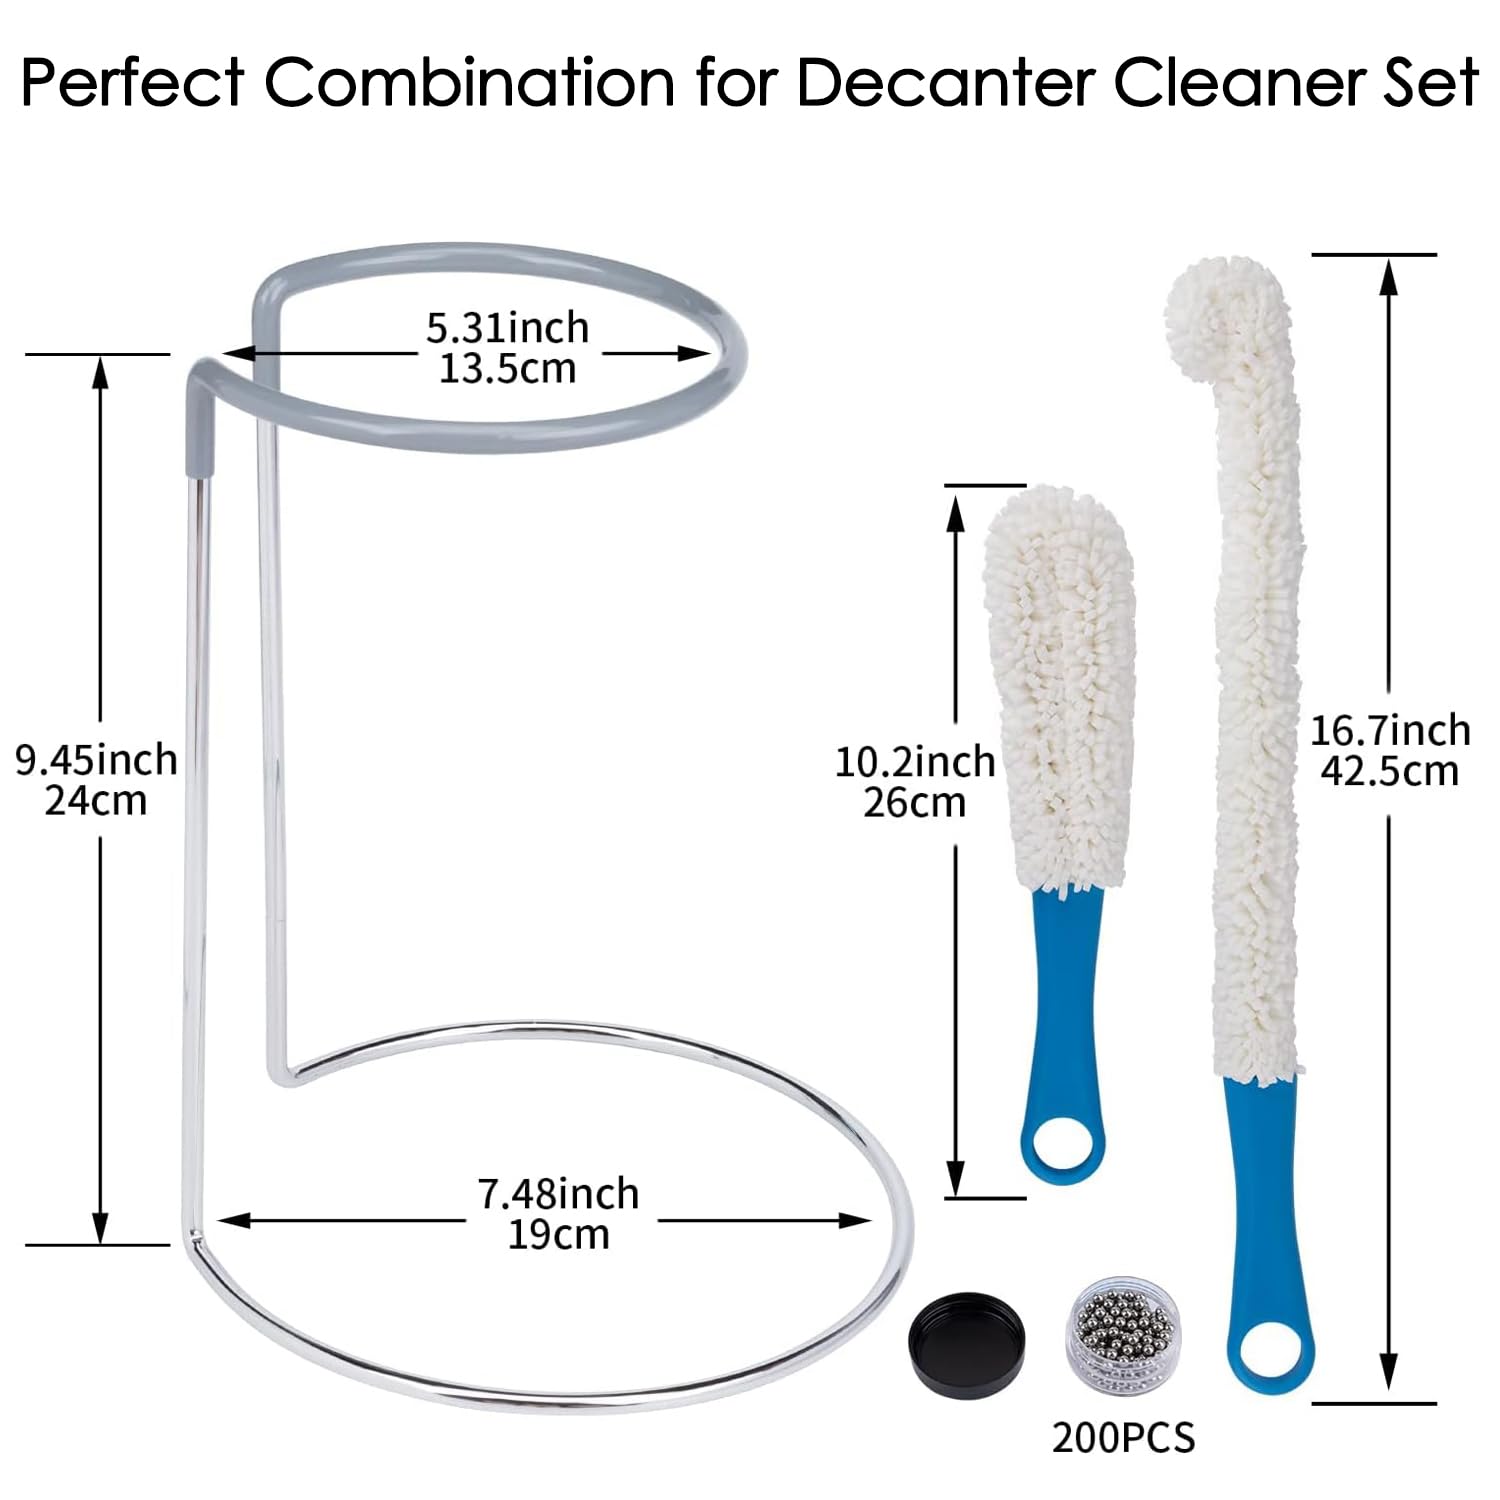 Wine Decanter Drying Stand with Rubber Coated Top to Prevent Scratches, Wine Decanter Drying Rack for Standard Large Wine Decanters, Decanter Cleaner Includes Cleaning Brush & Decanter Cleaning Beads